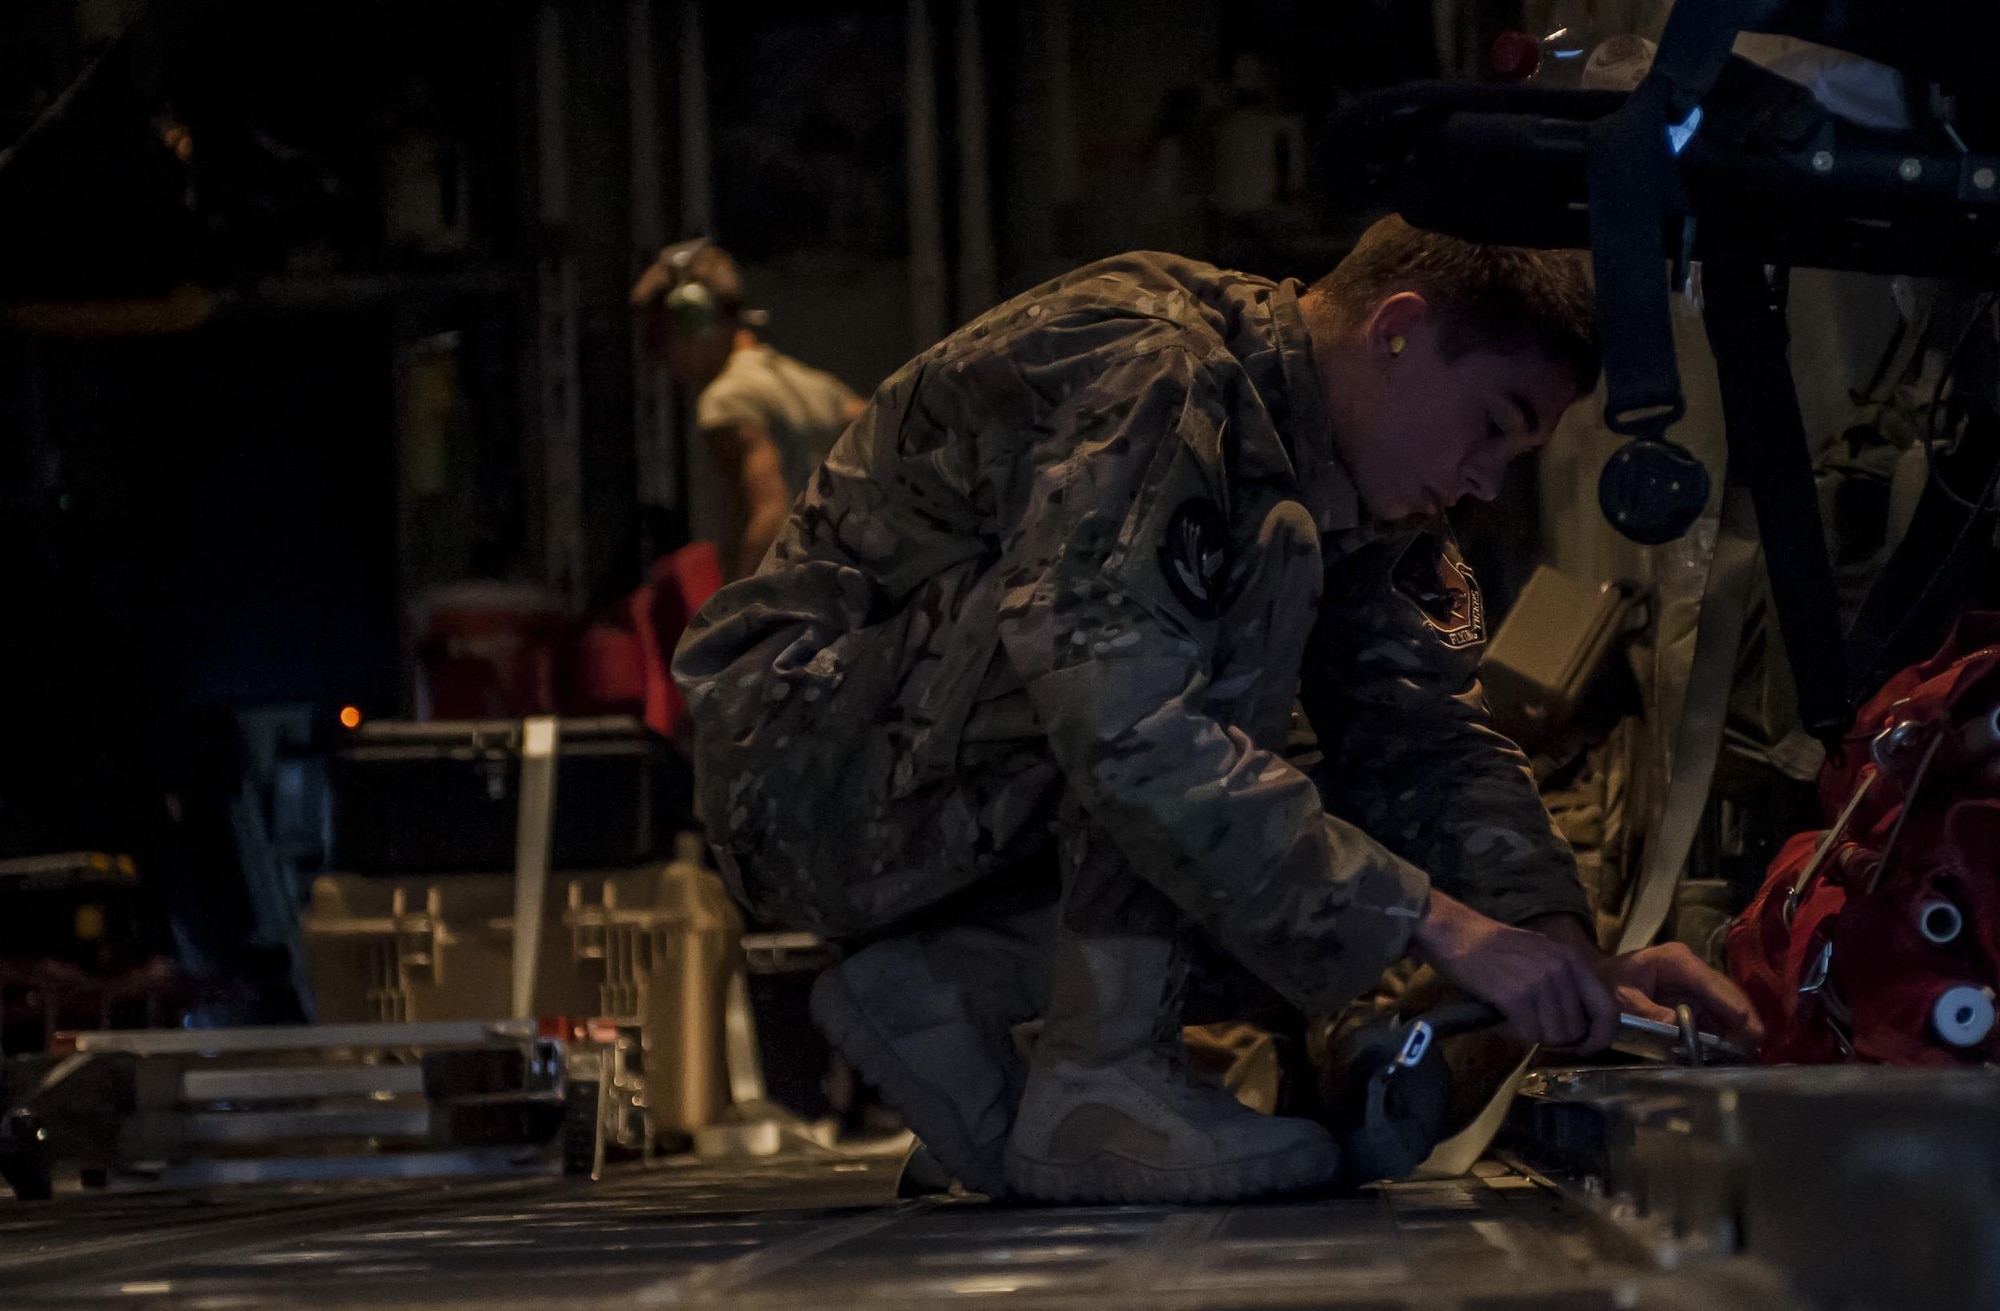 Airmen assigned to the 71st Rescue Squadron, Moody Air Force Base, Georgia, prepare an HC-130J Combat King II for Red Flag 16-4 night operations at Nellis Air Force Base, Nev., Aug. 25, 2016. HC-130J crews normally fly at night at low to medium altitude levels in contested or sensitive environments, both over land or overwater. Crews use night vision goggles for tactical flight profiles to avoid detection to accomplish covert infiltration/exfiltration and transload operations. (U.S. Air Force photo by Airman 1st Class Kevin Tanenbaum/Released)